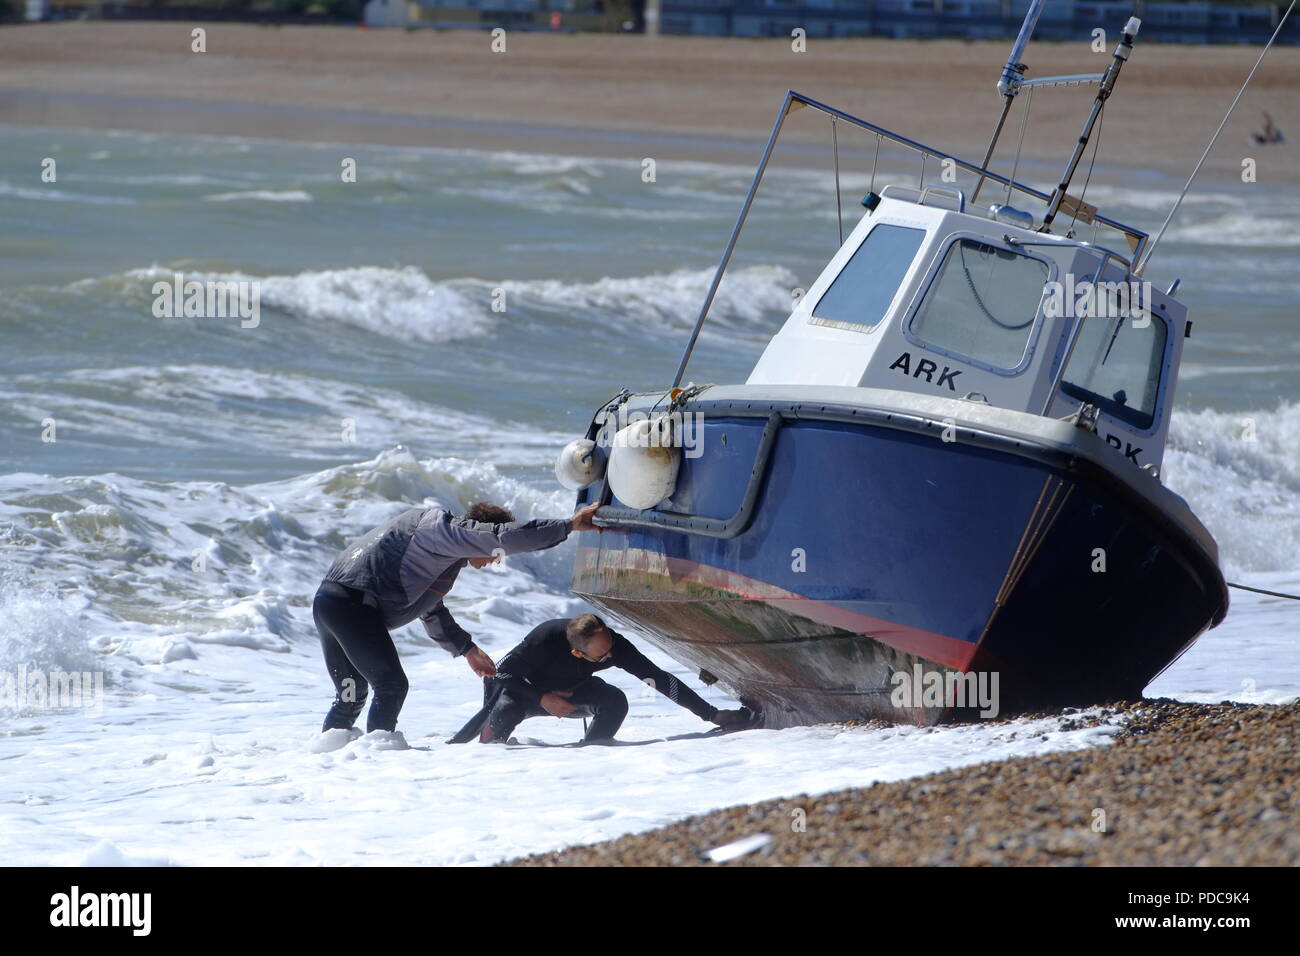 Seaford, East Sussex, UK. fishing boat washes up on Seaford beach after strong winds. Stock Photo